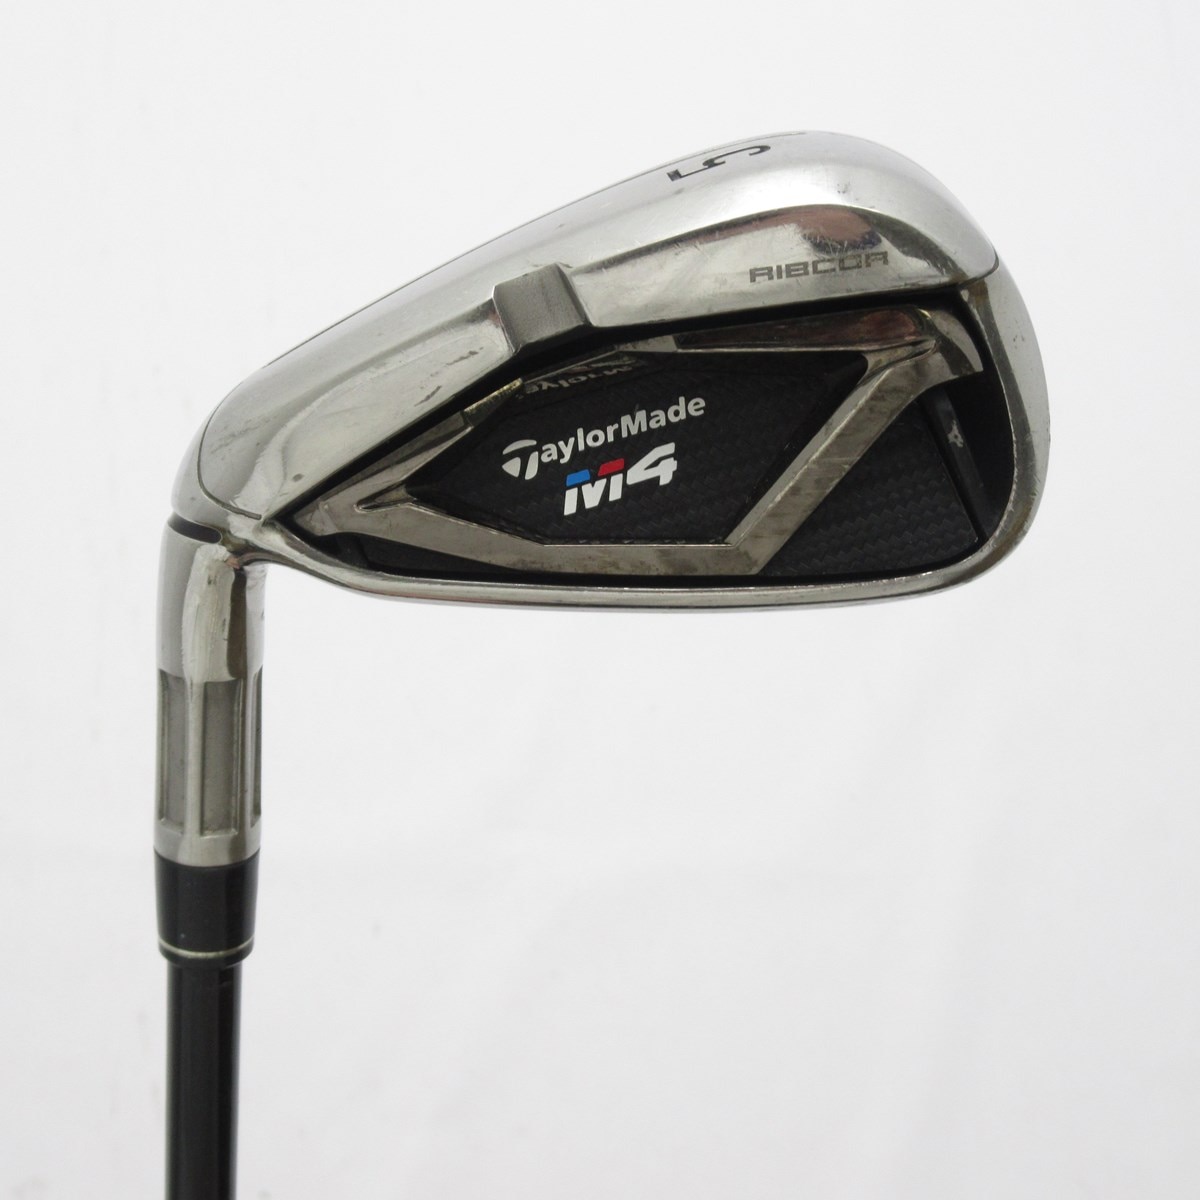 taylorMade　Ｍ4アイアンセットレフティ用PW435°